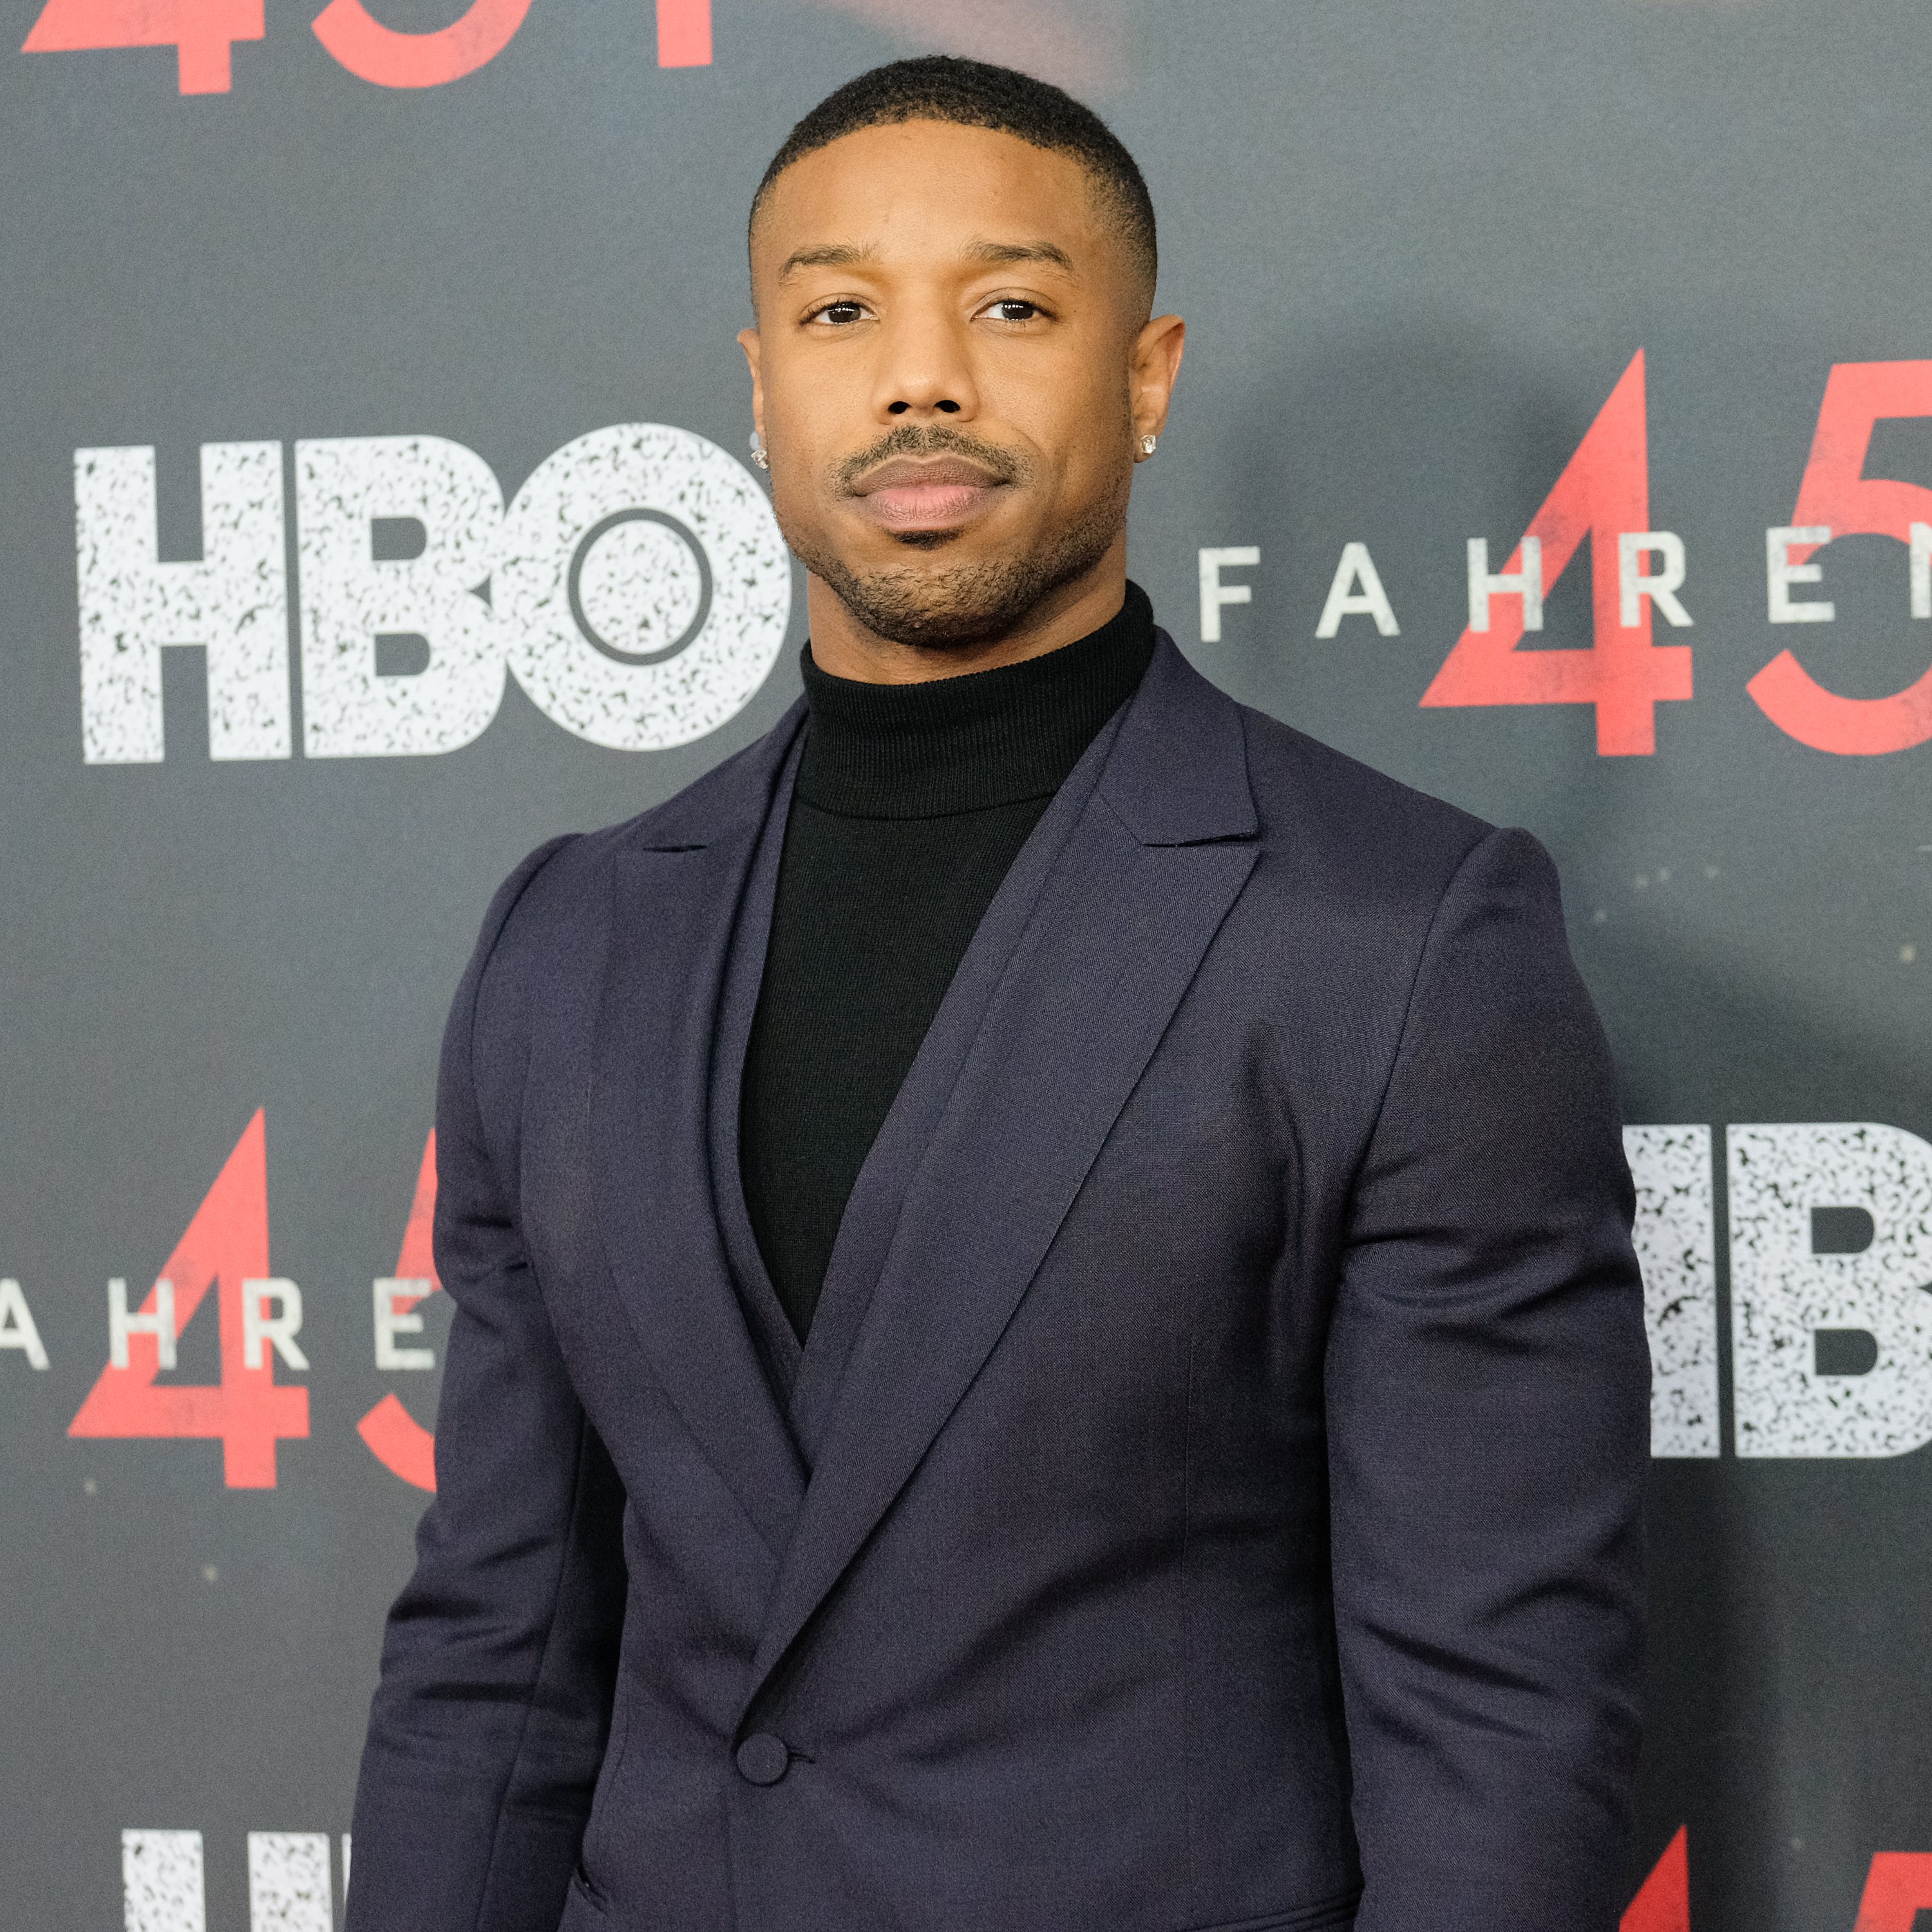  Michael B. Jordan attends the "Fahrenheit 451" New York Premiere on May 8, 2018, in New York City. | Source: Getty Images.